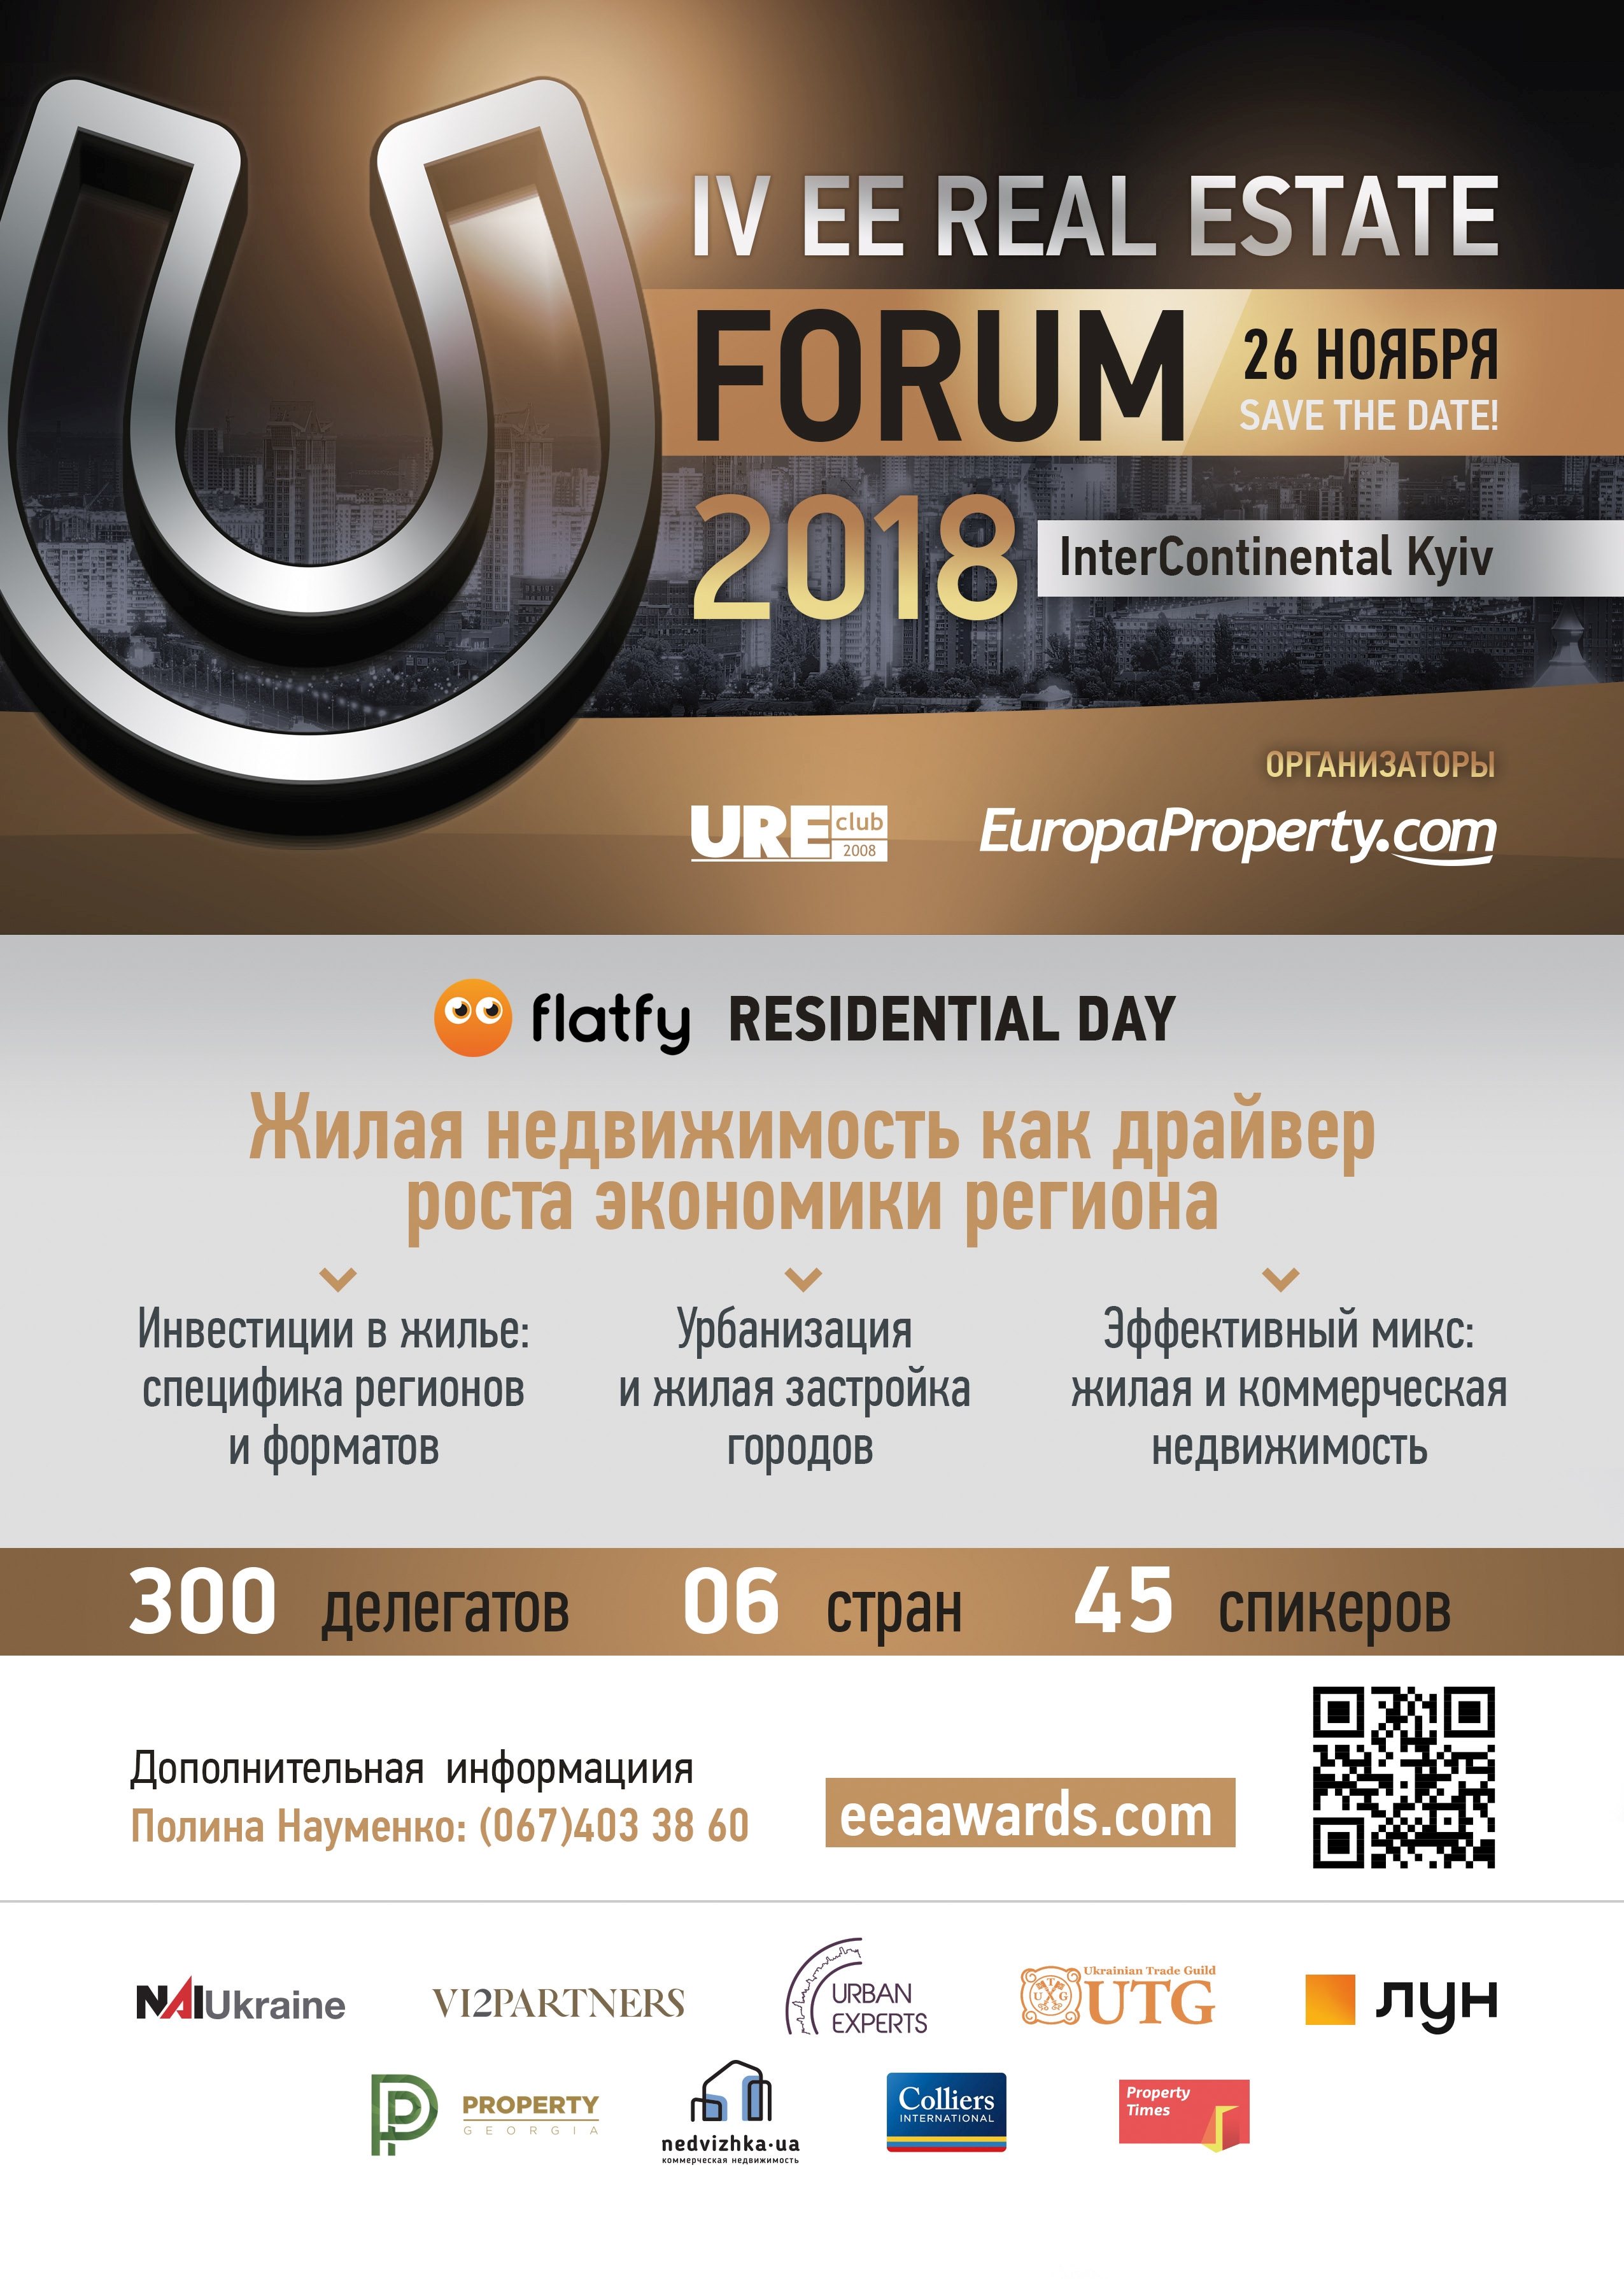  IV Annual Eastern Europe Real Estate Forum and Project Awards